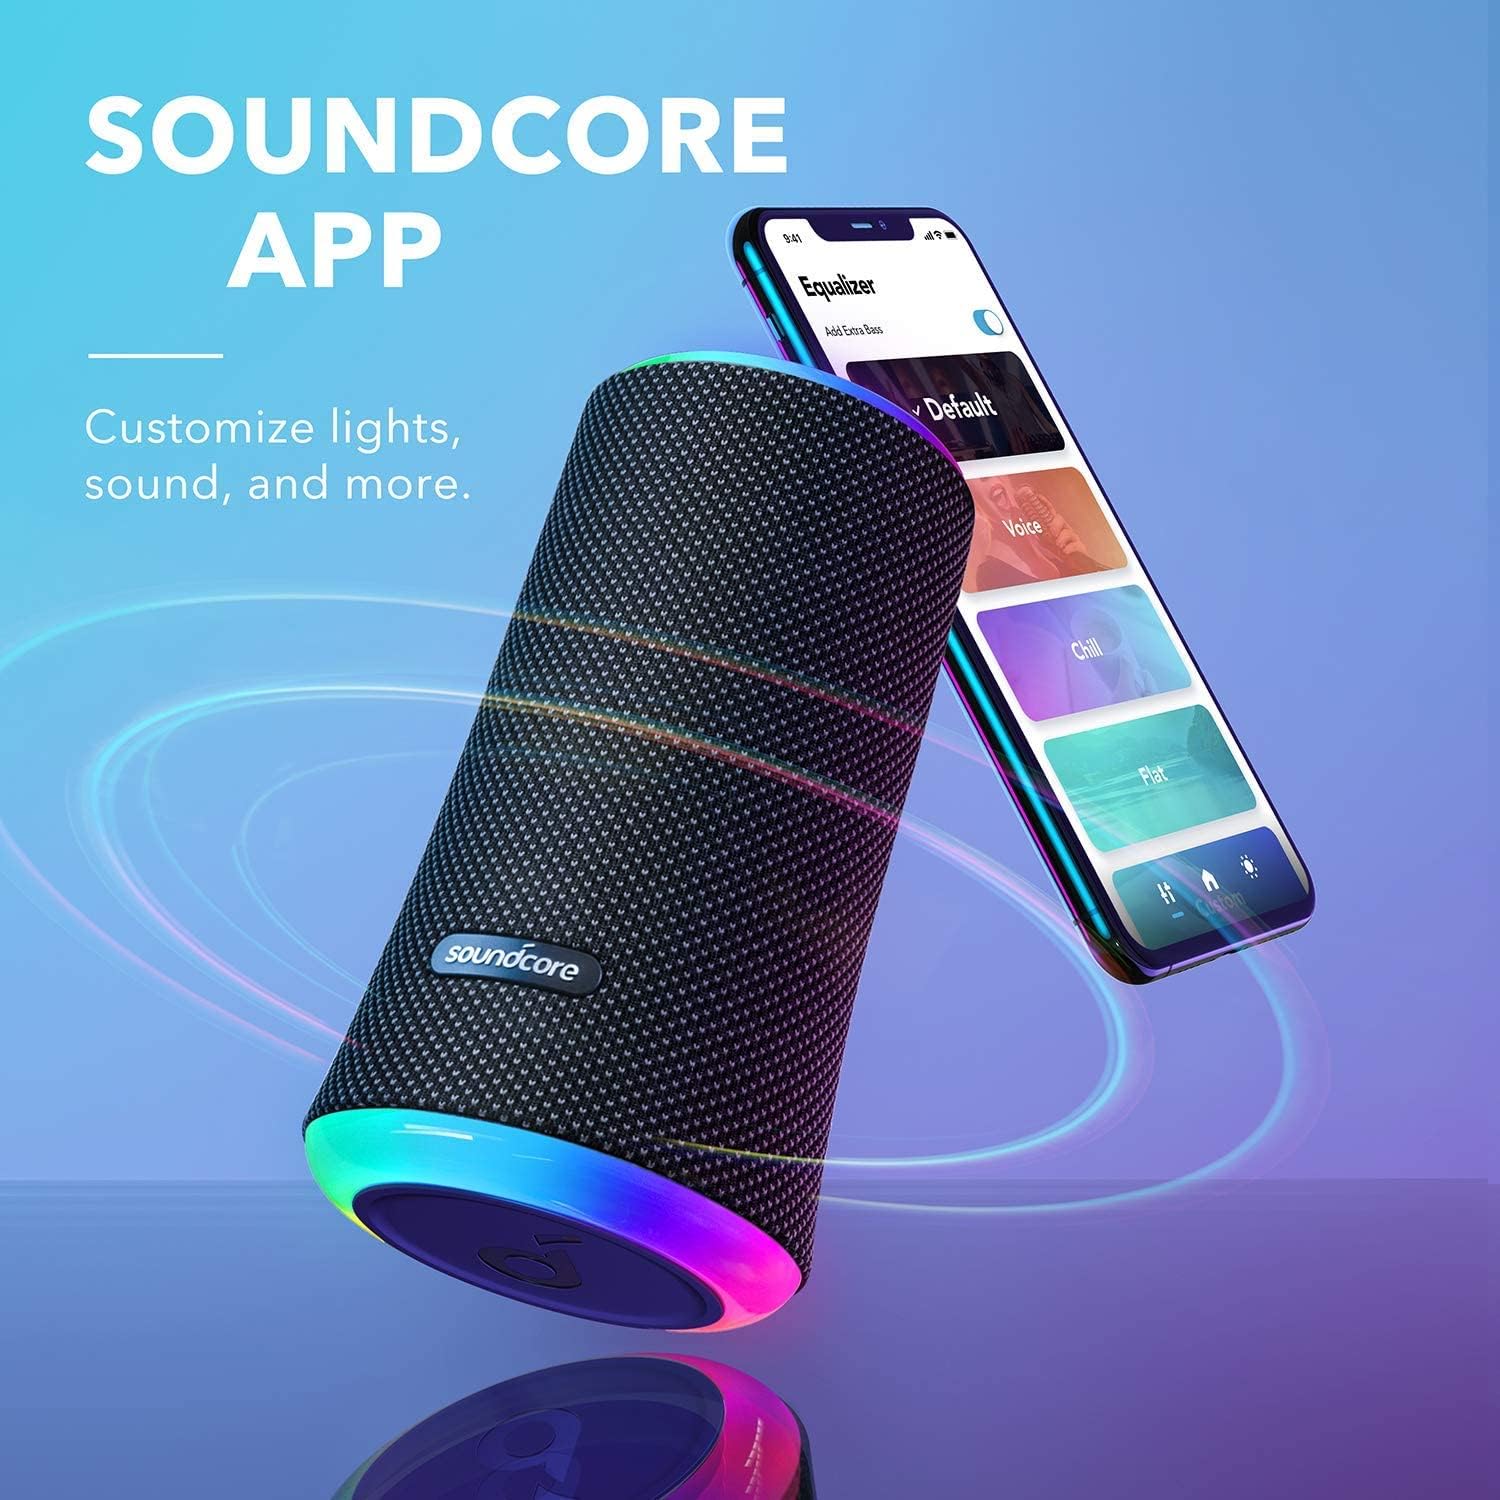 Anker Soundcore Flare 2 Bluetooth Speaker, with IPX7 Waterproof Protection and 360° Sound for Backyard and Beach Party, 20W Wireless Speaker with PartyCast, EQ Adjustment, and 12-Hour Playtime, Black